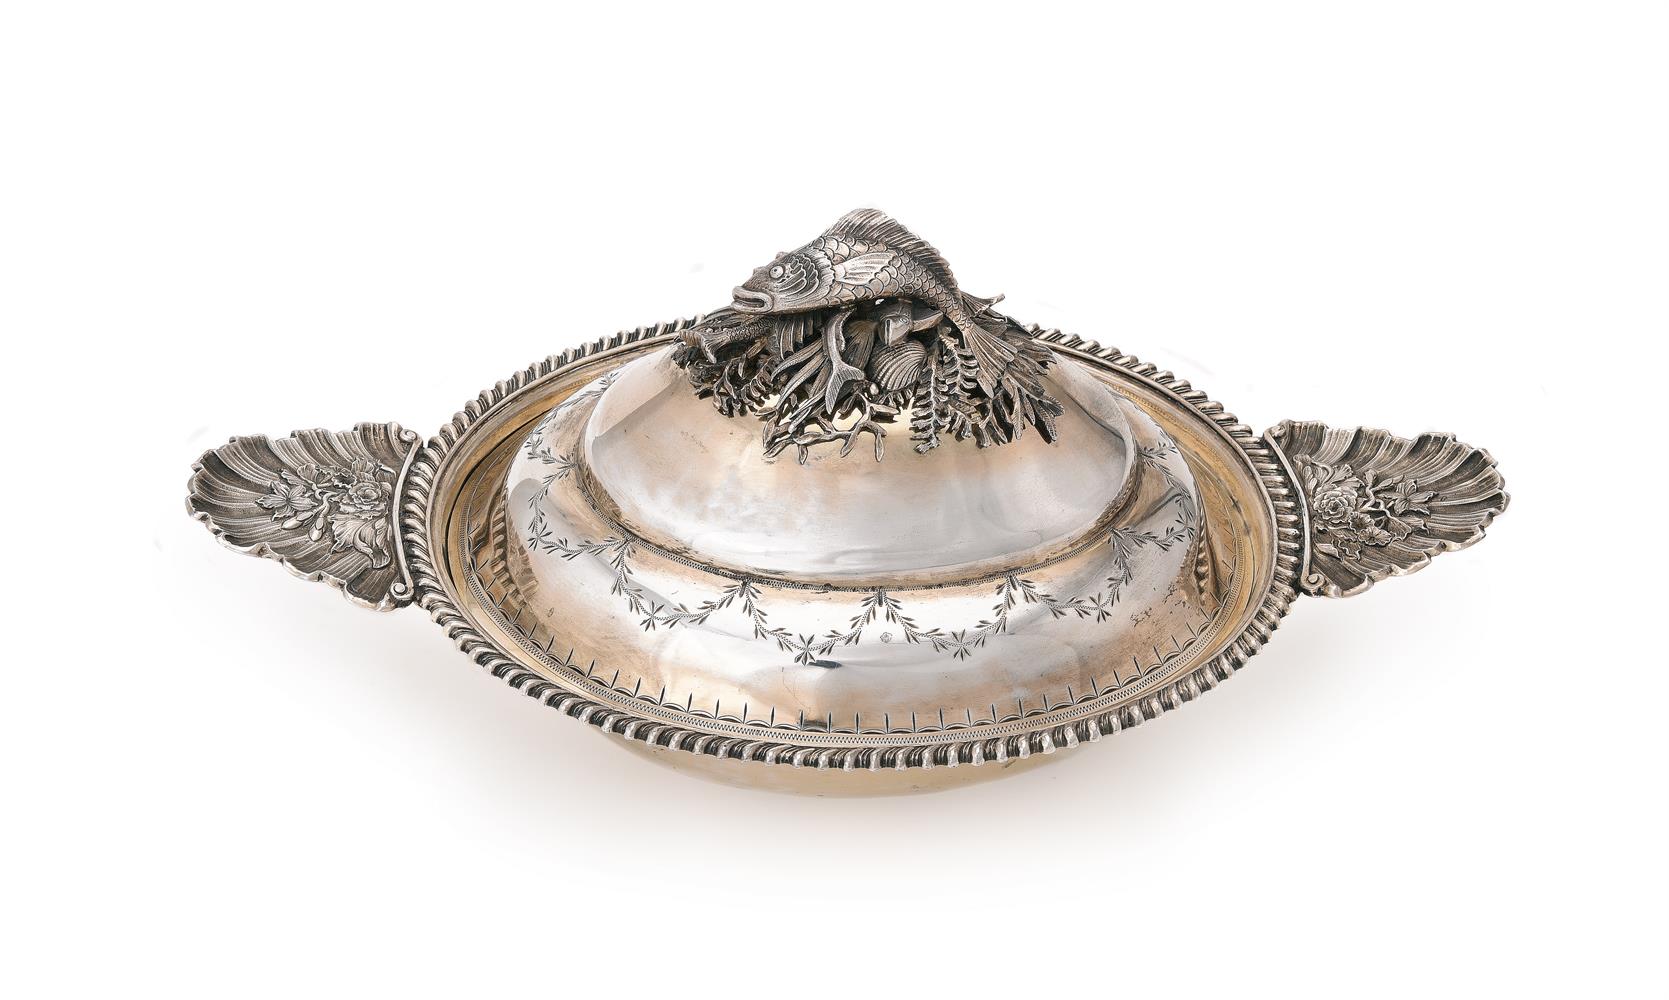 A LATE 18TH CENTURY RUSSIAN SILVER GILT OVAL FISH TUREEN AND COVER